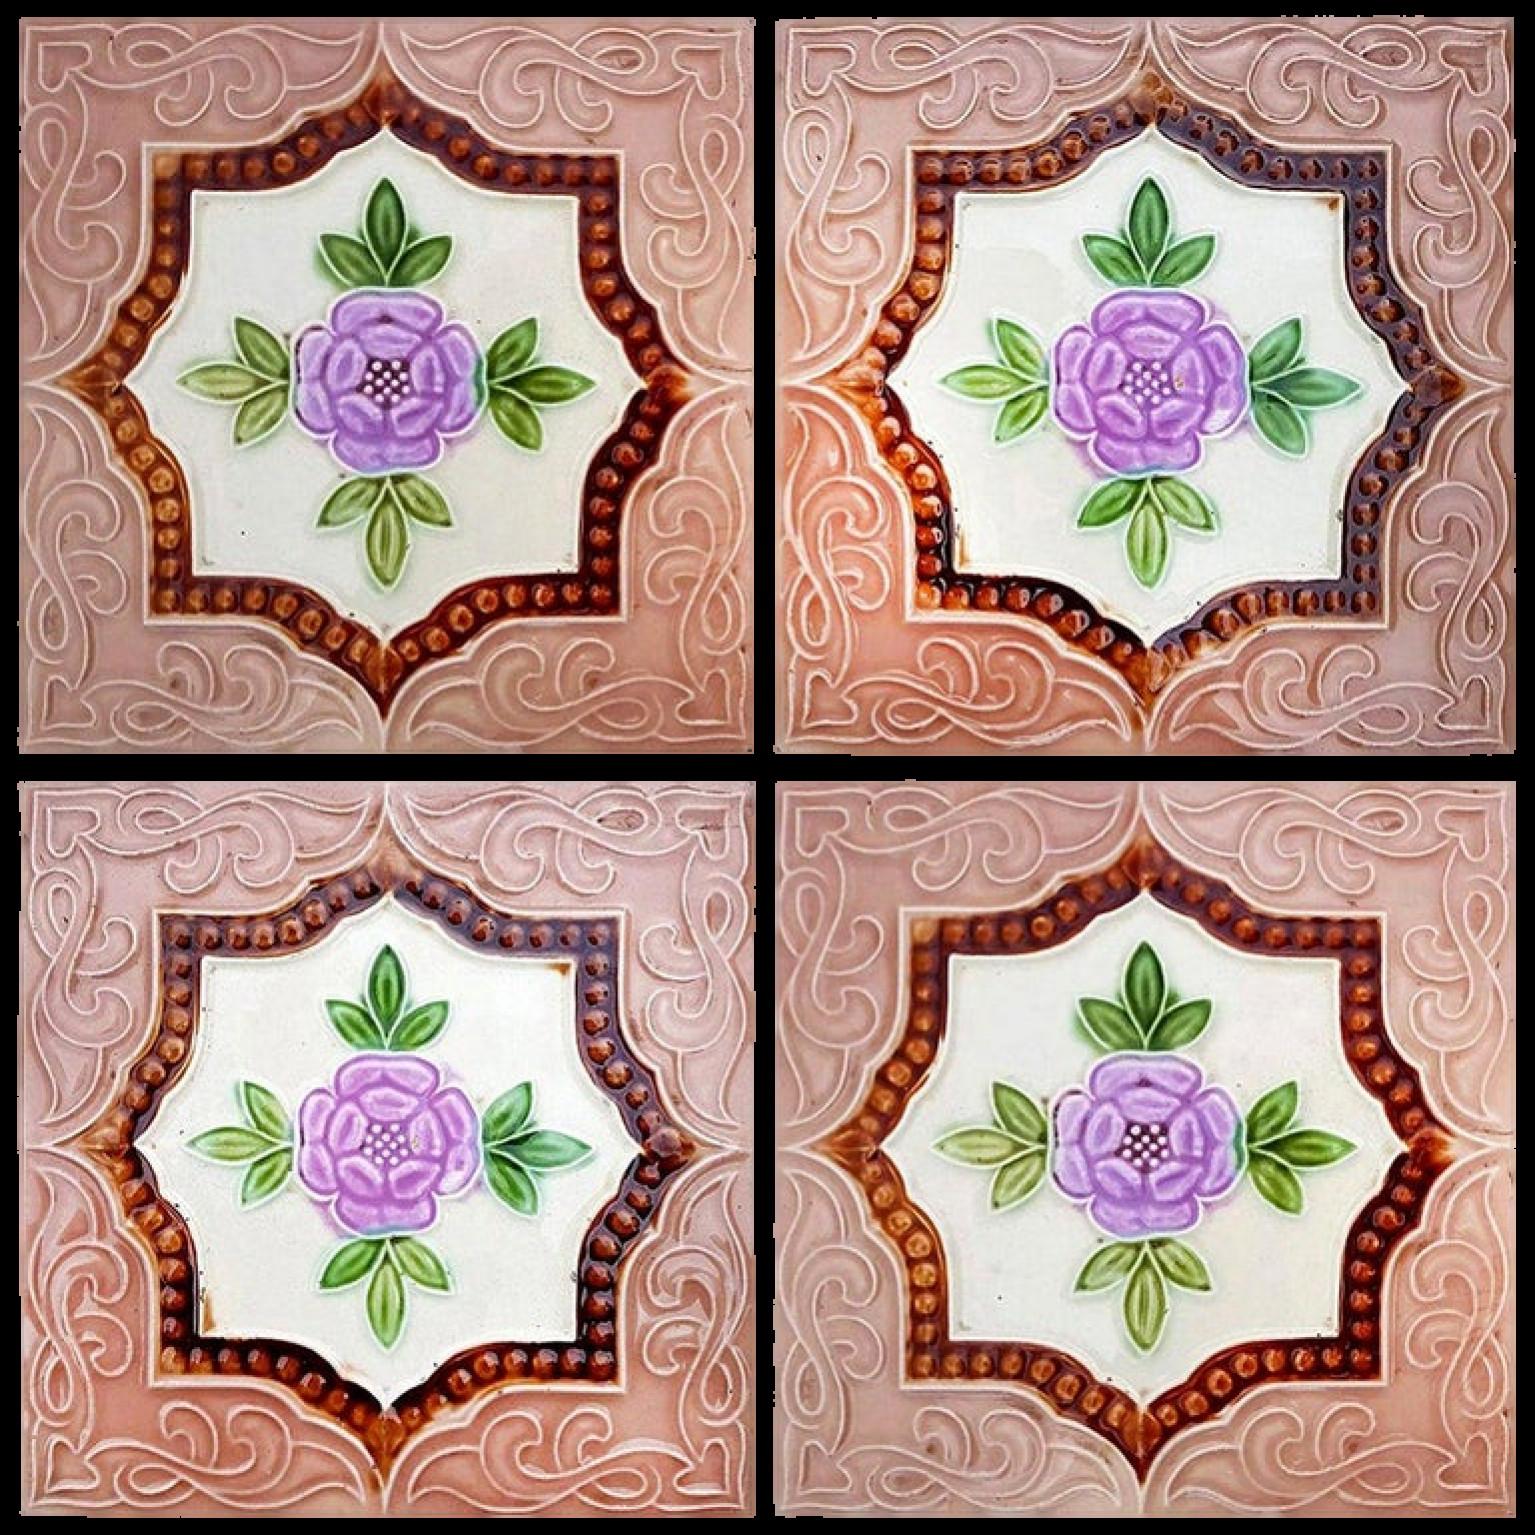 This is an amazing set of antique Art Deco handmade tiles. A beautiful relief and color. These tiles would be charming displayed on easels, framed or incorporated into a custom tile design.

Please note that the price is for one piece. We sell them